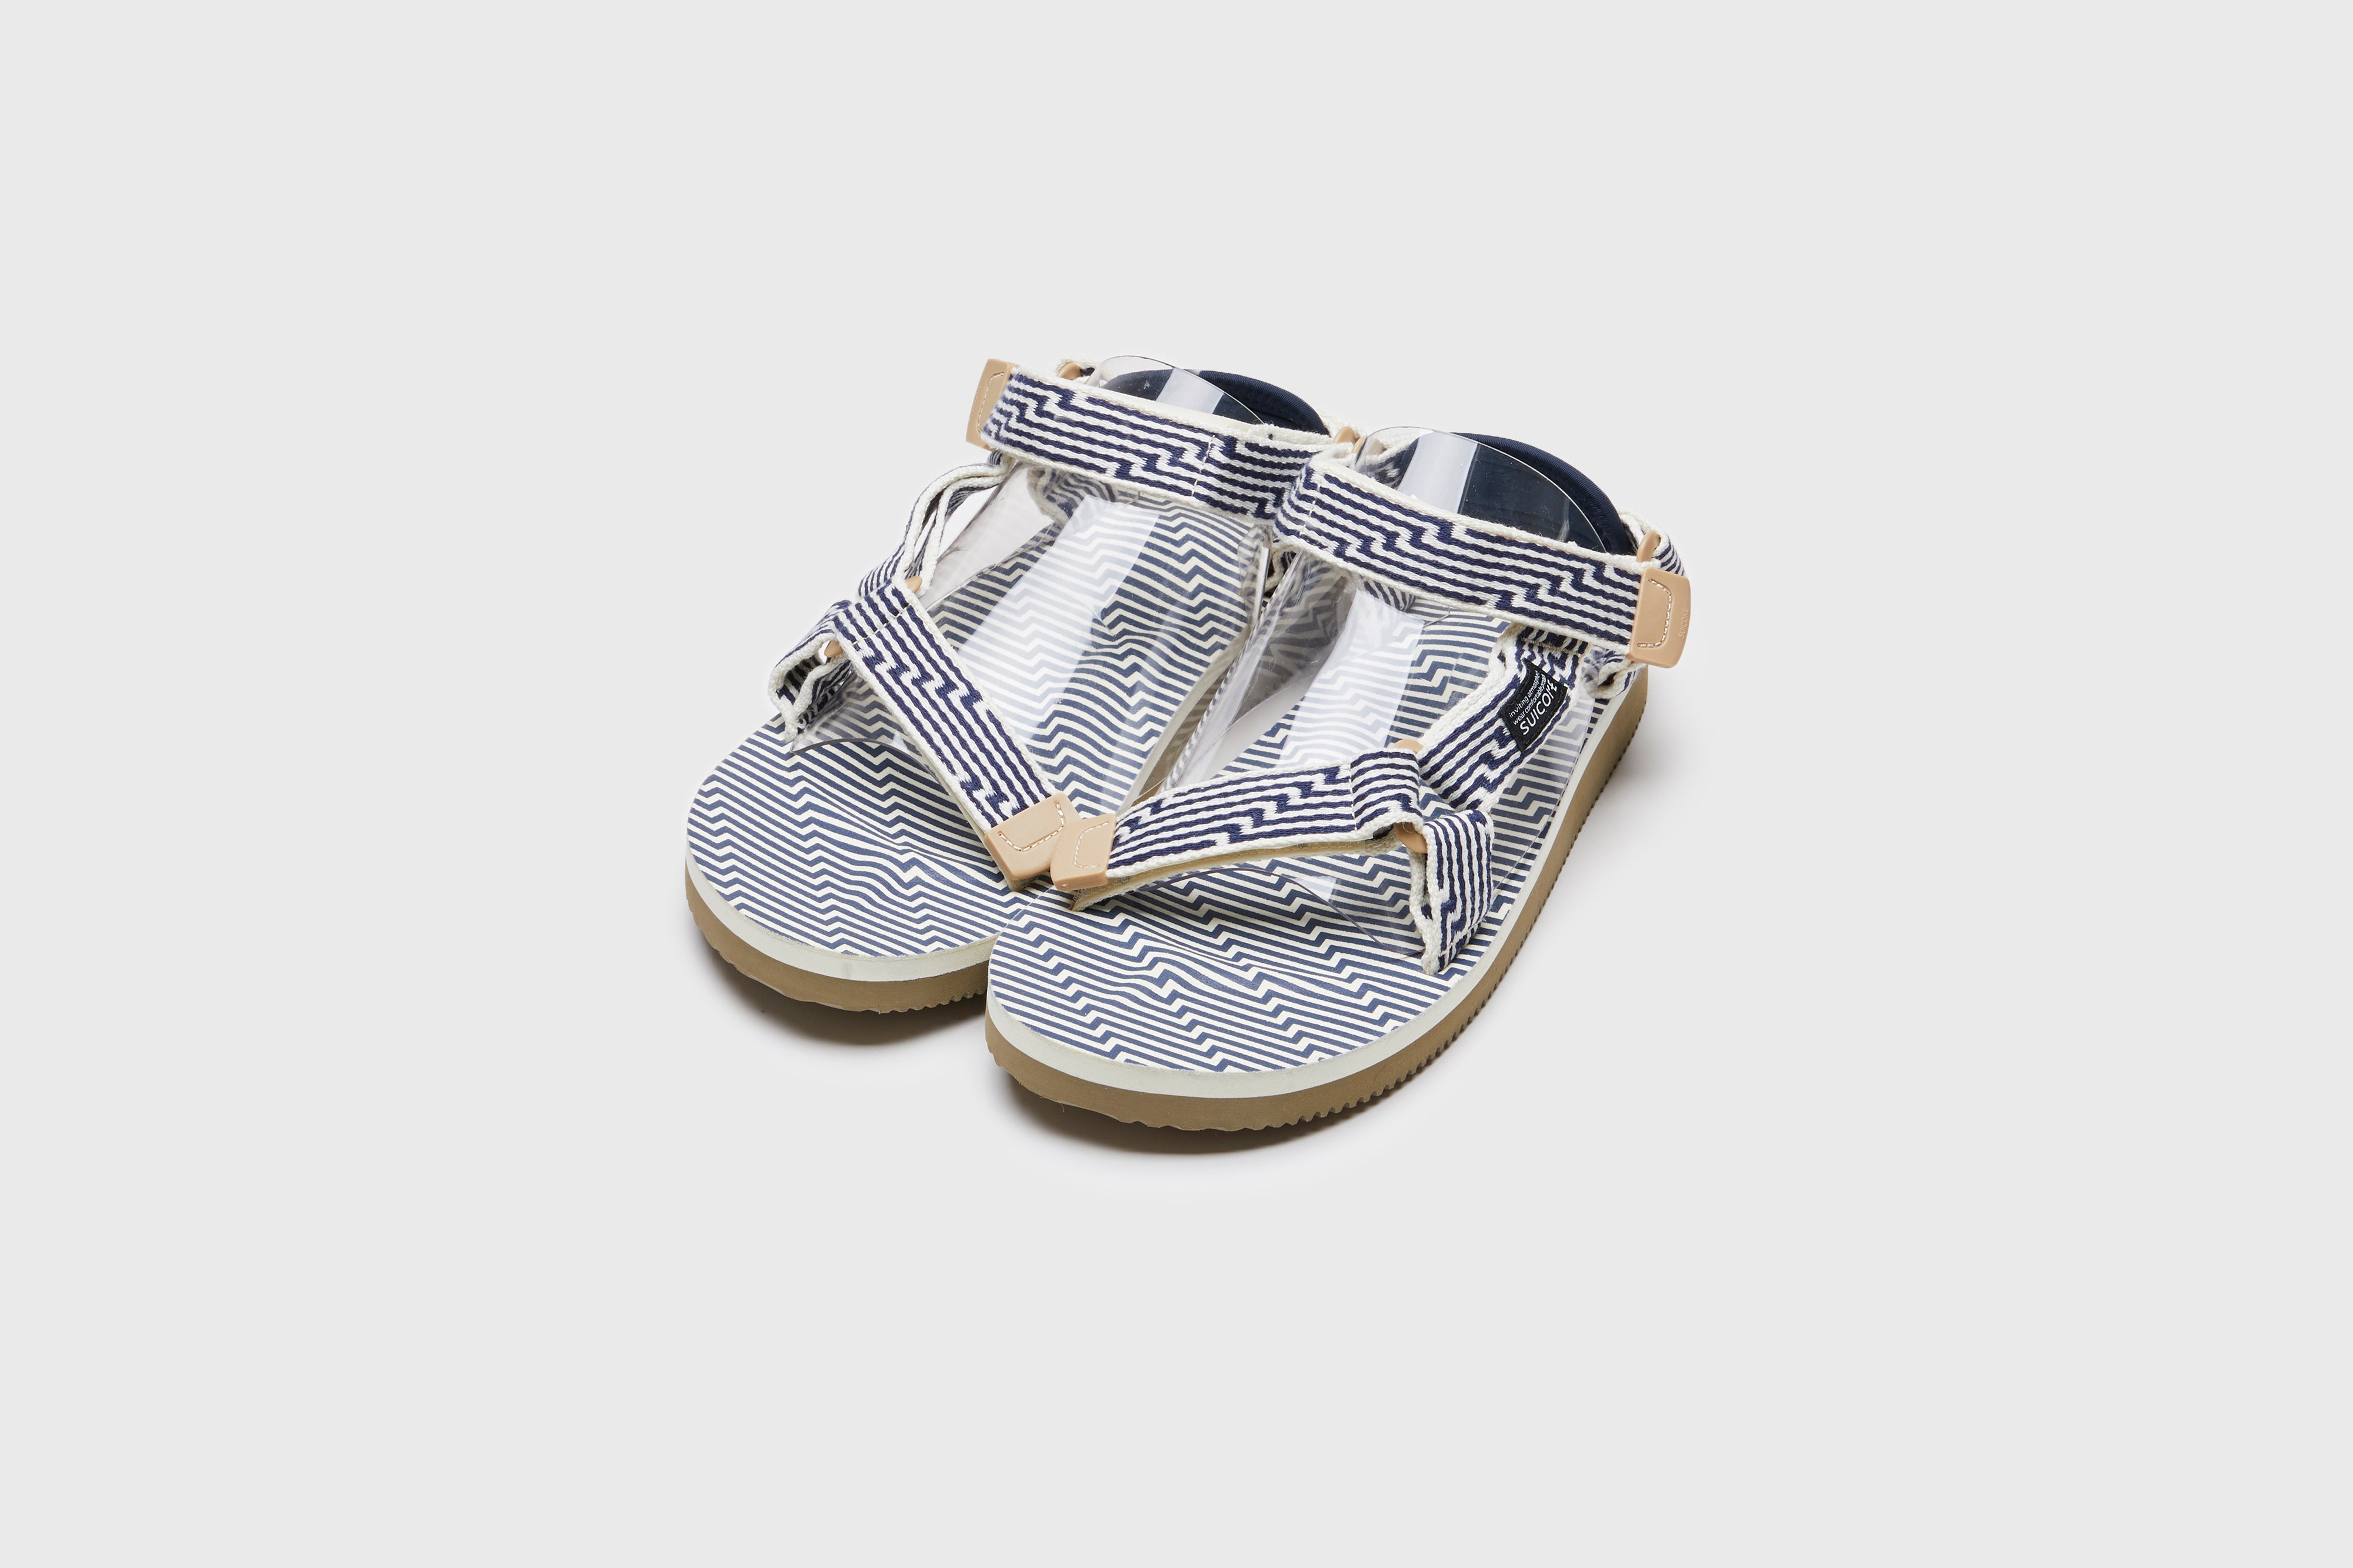 SUICOKE DEPA-JC01 sandals with ivory &amp; navy nylon upper, ivory &amp; navy midsole and sole, strap and logo patch. From Spring/Summer 2023 collection on eightywingold Web Store, an official partner of SUICOKE. OG-022-JC01 IVORY X NAVY